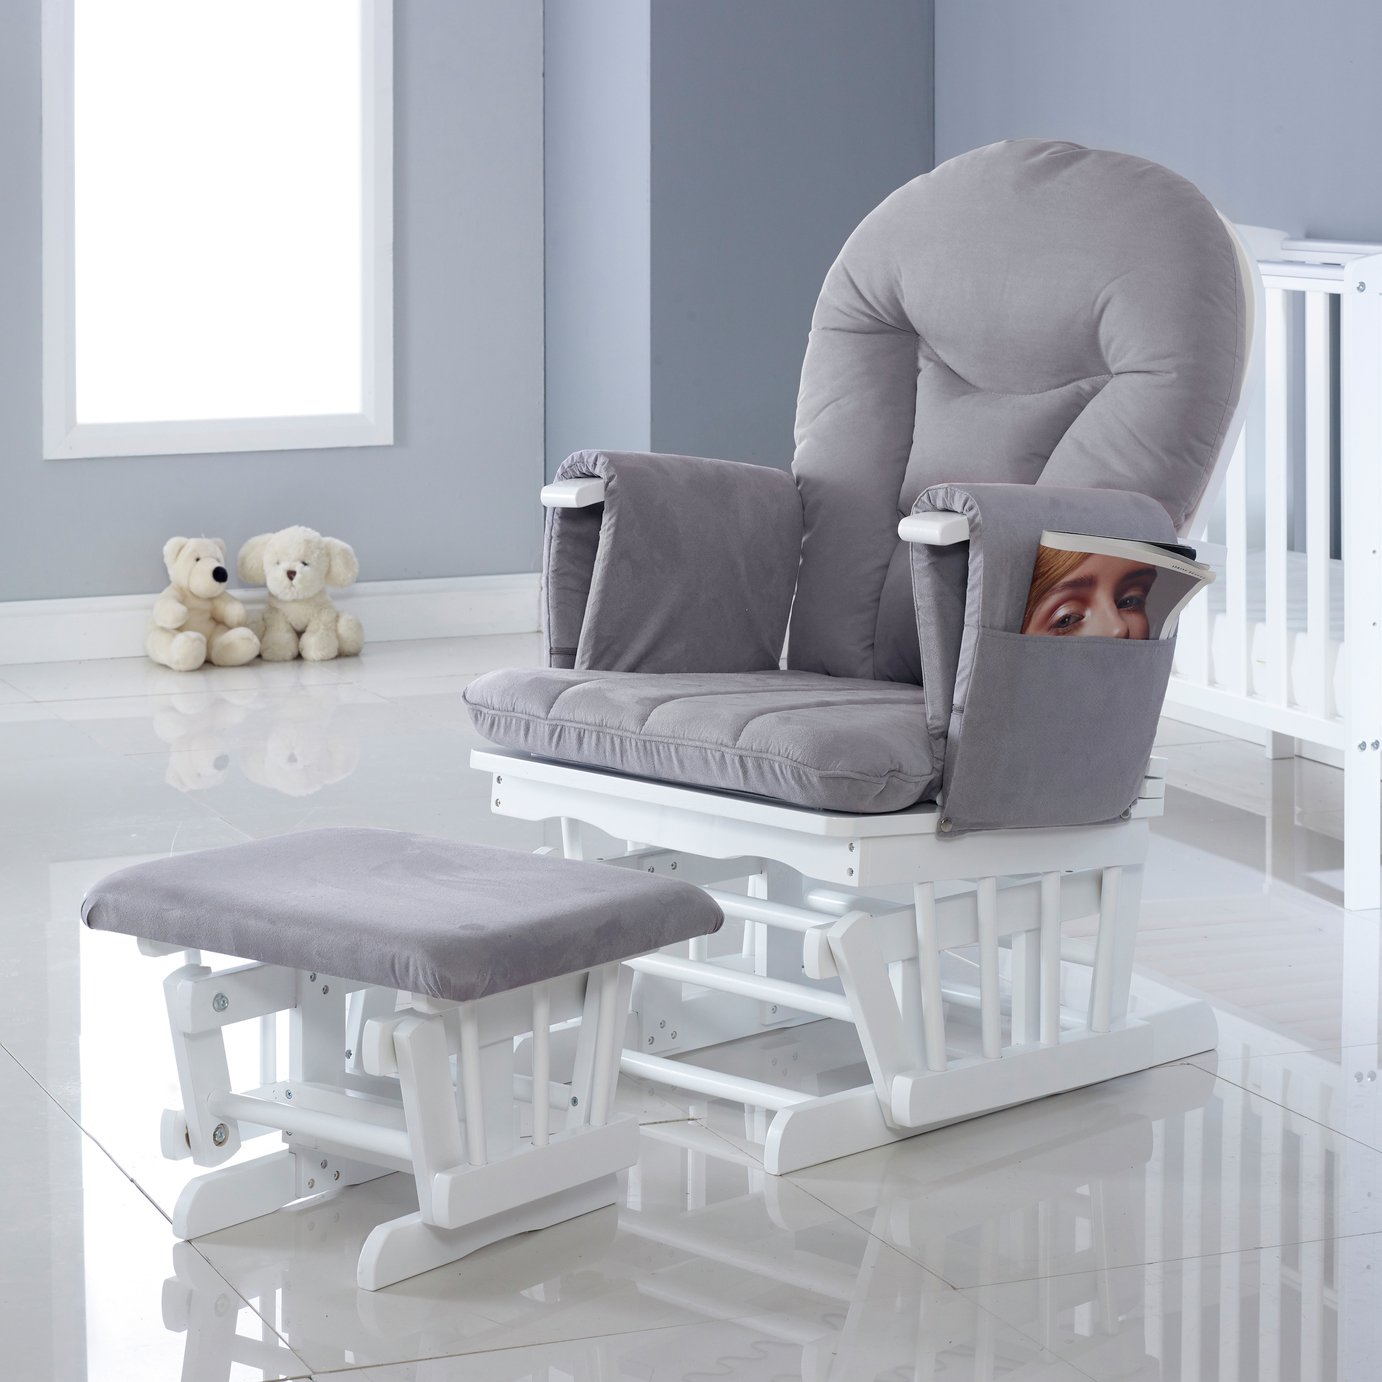 Babyhoot Alford Reclining Glider Chair and Stool Review